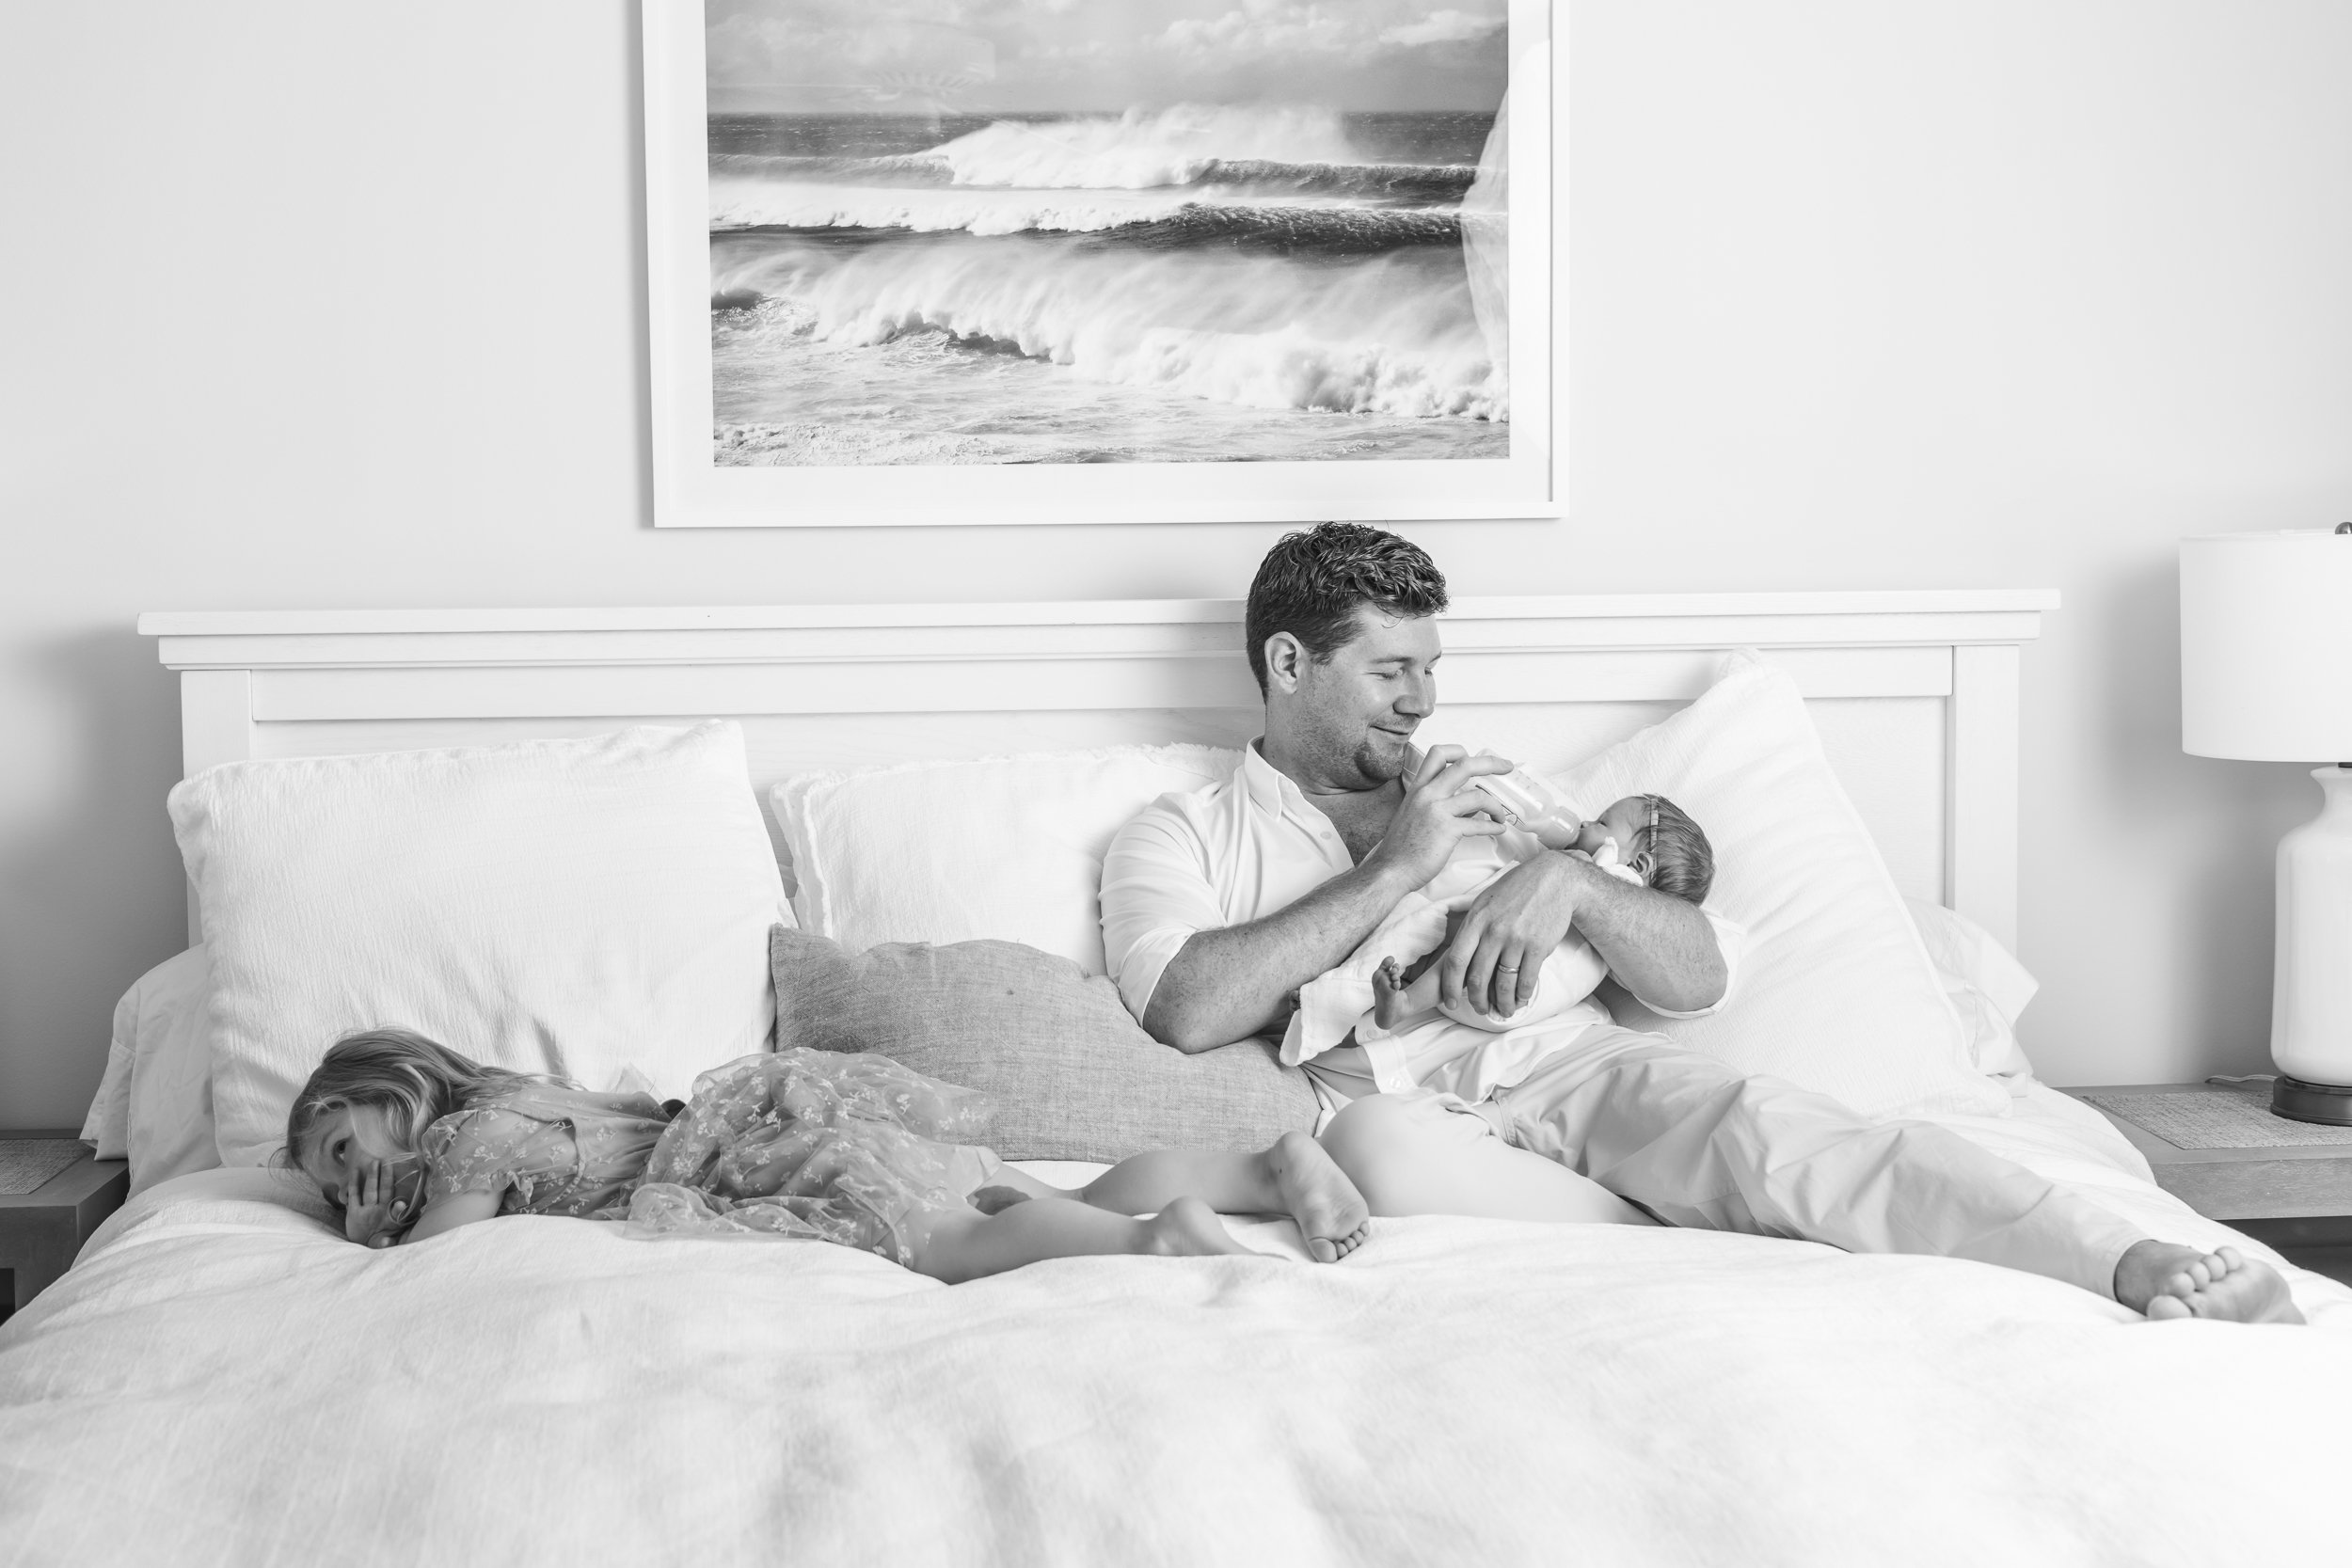  Dad cuddled on his bed feeding his newborn daughter a bottle while his toddler daughter cuddle. #nicolehawkinsnewborns #njfamilyphotographer #chatham #newjersey #newbornfamilyportraits #nicolehawkinsphotography #inhomeportraits #secondtimeparents 